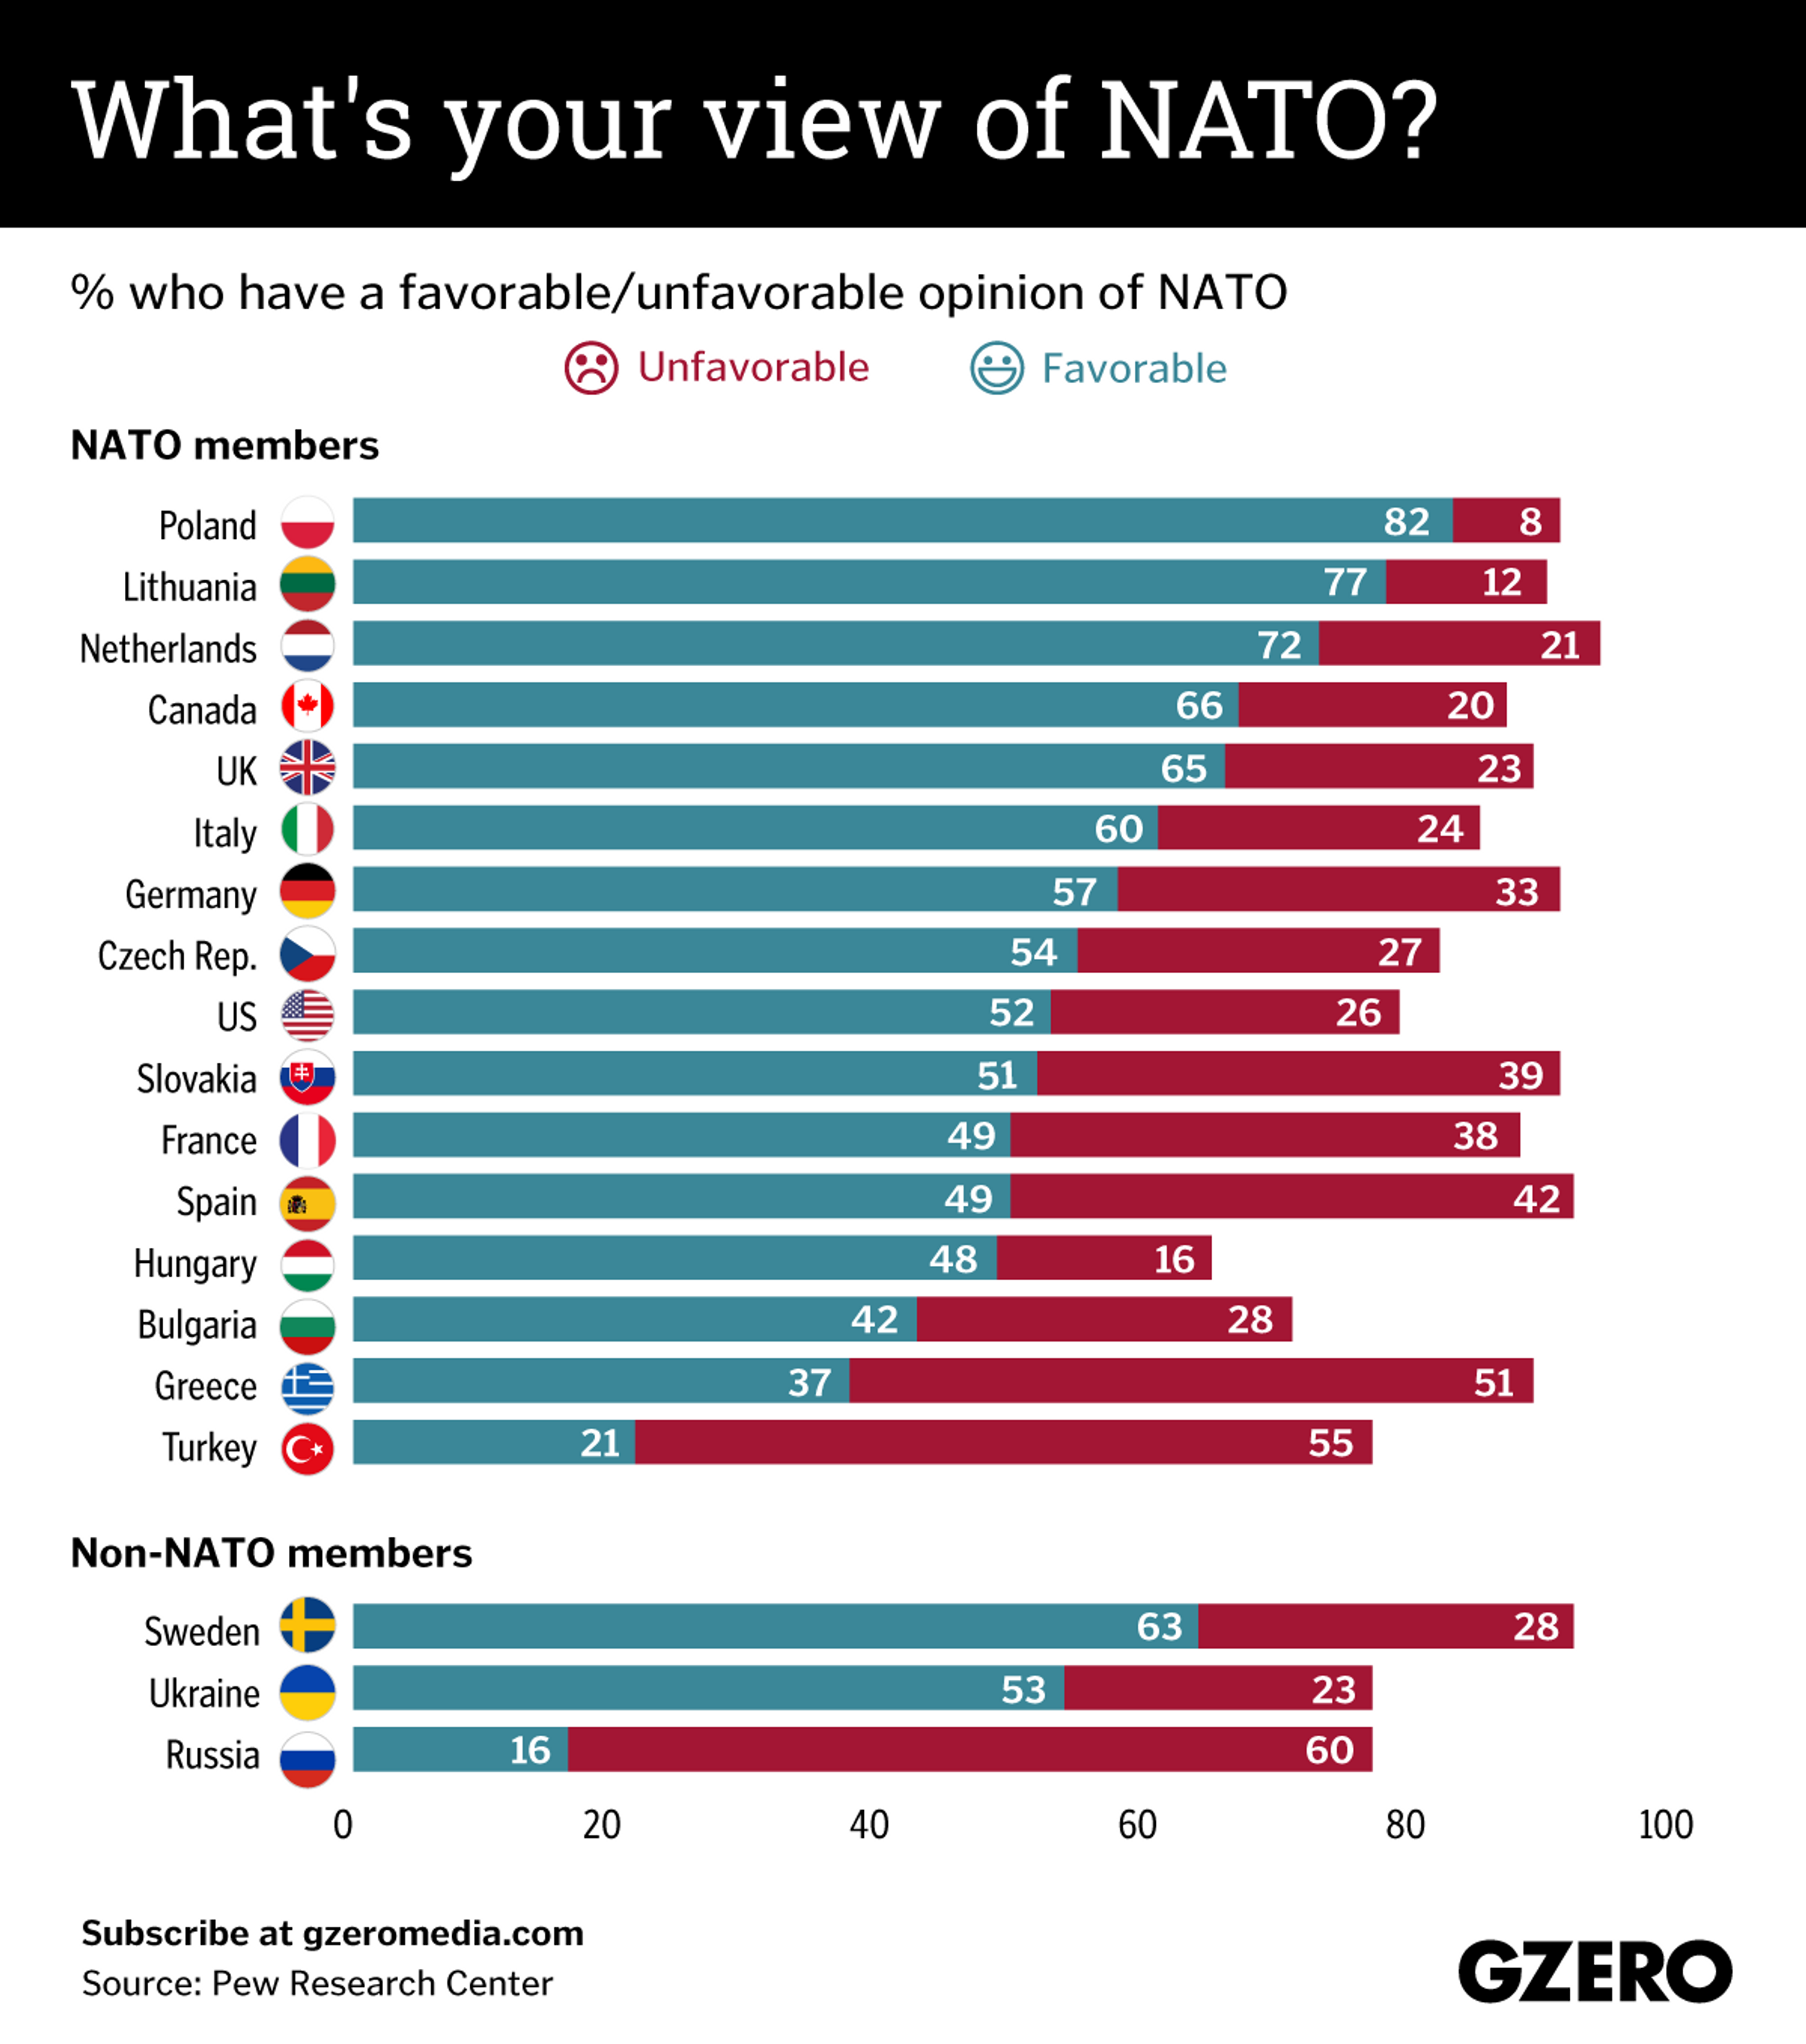 The Graphic Truth: What's your view of NATO?